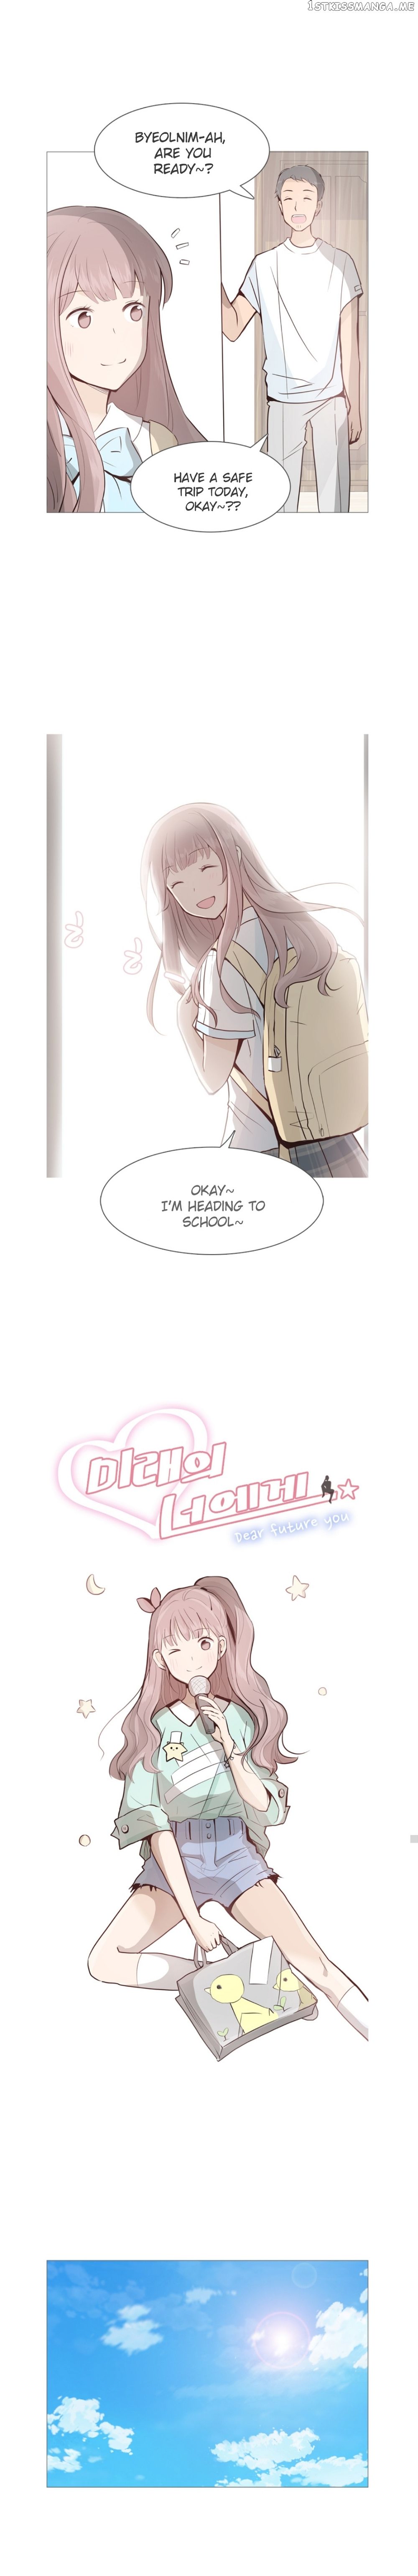 Dear Future You chapter 39 - Page 2